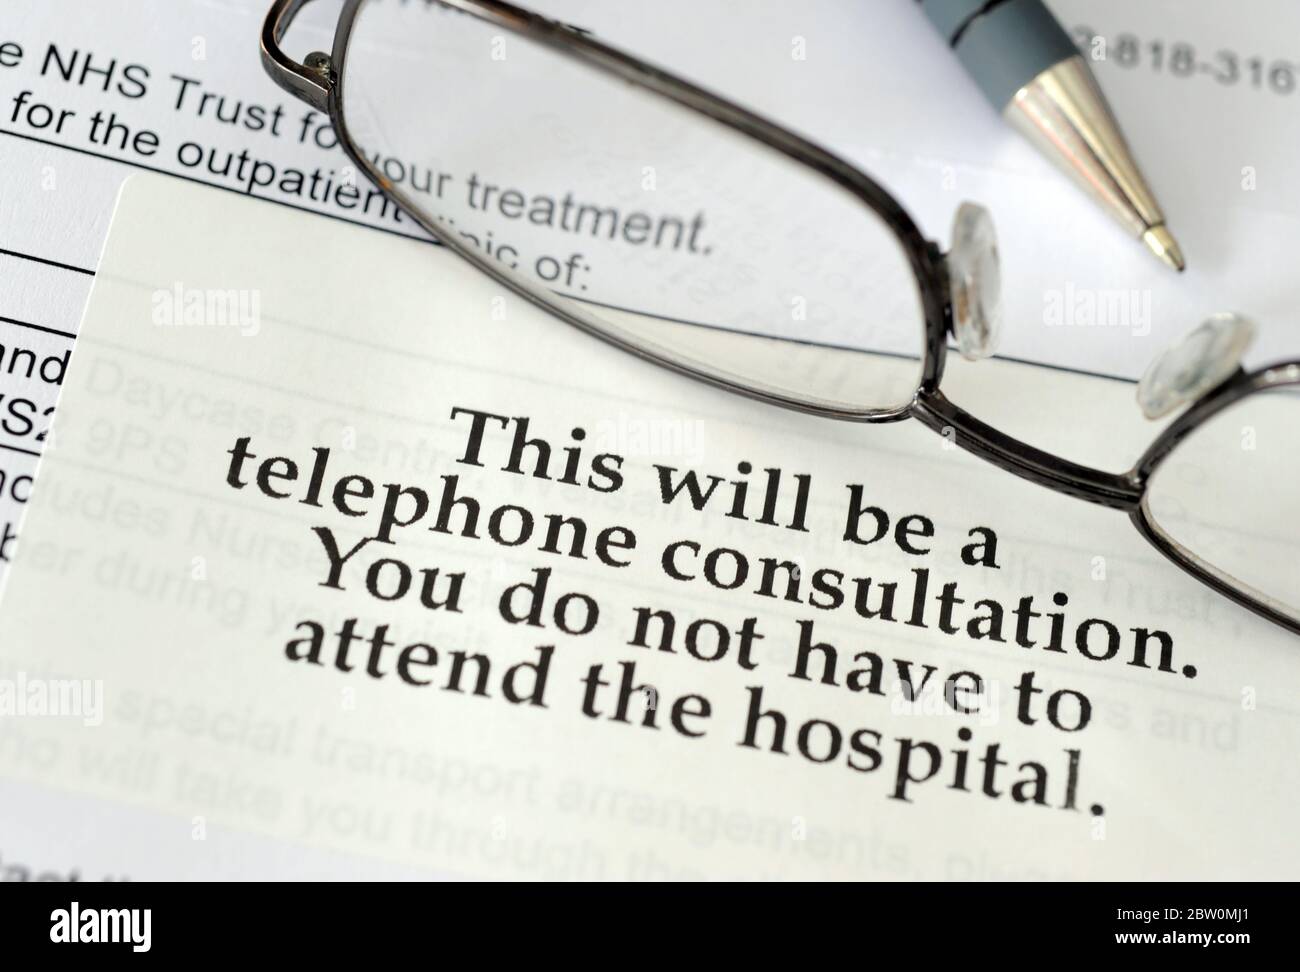 NHS  HOSPITAL OUTPATIENT APPOINTMENT LETTER WITH TELEPHONE CONSULTATION INFORMATION STICKER RE COVID-19 CORONAVIRUS HEALTH CRISIS ETC UK Stock Photo